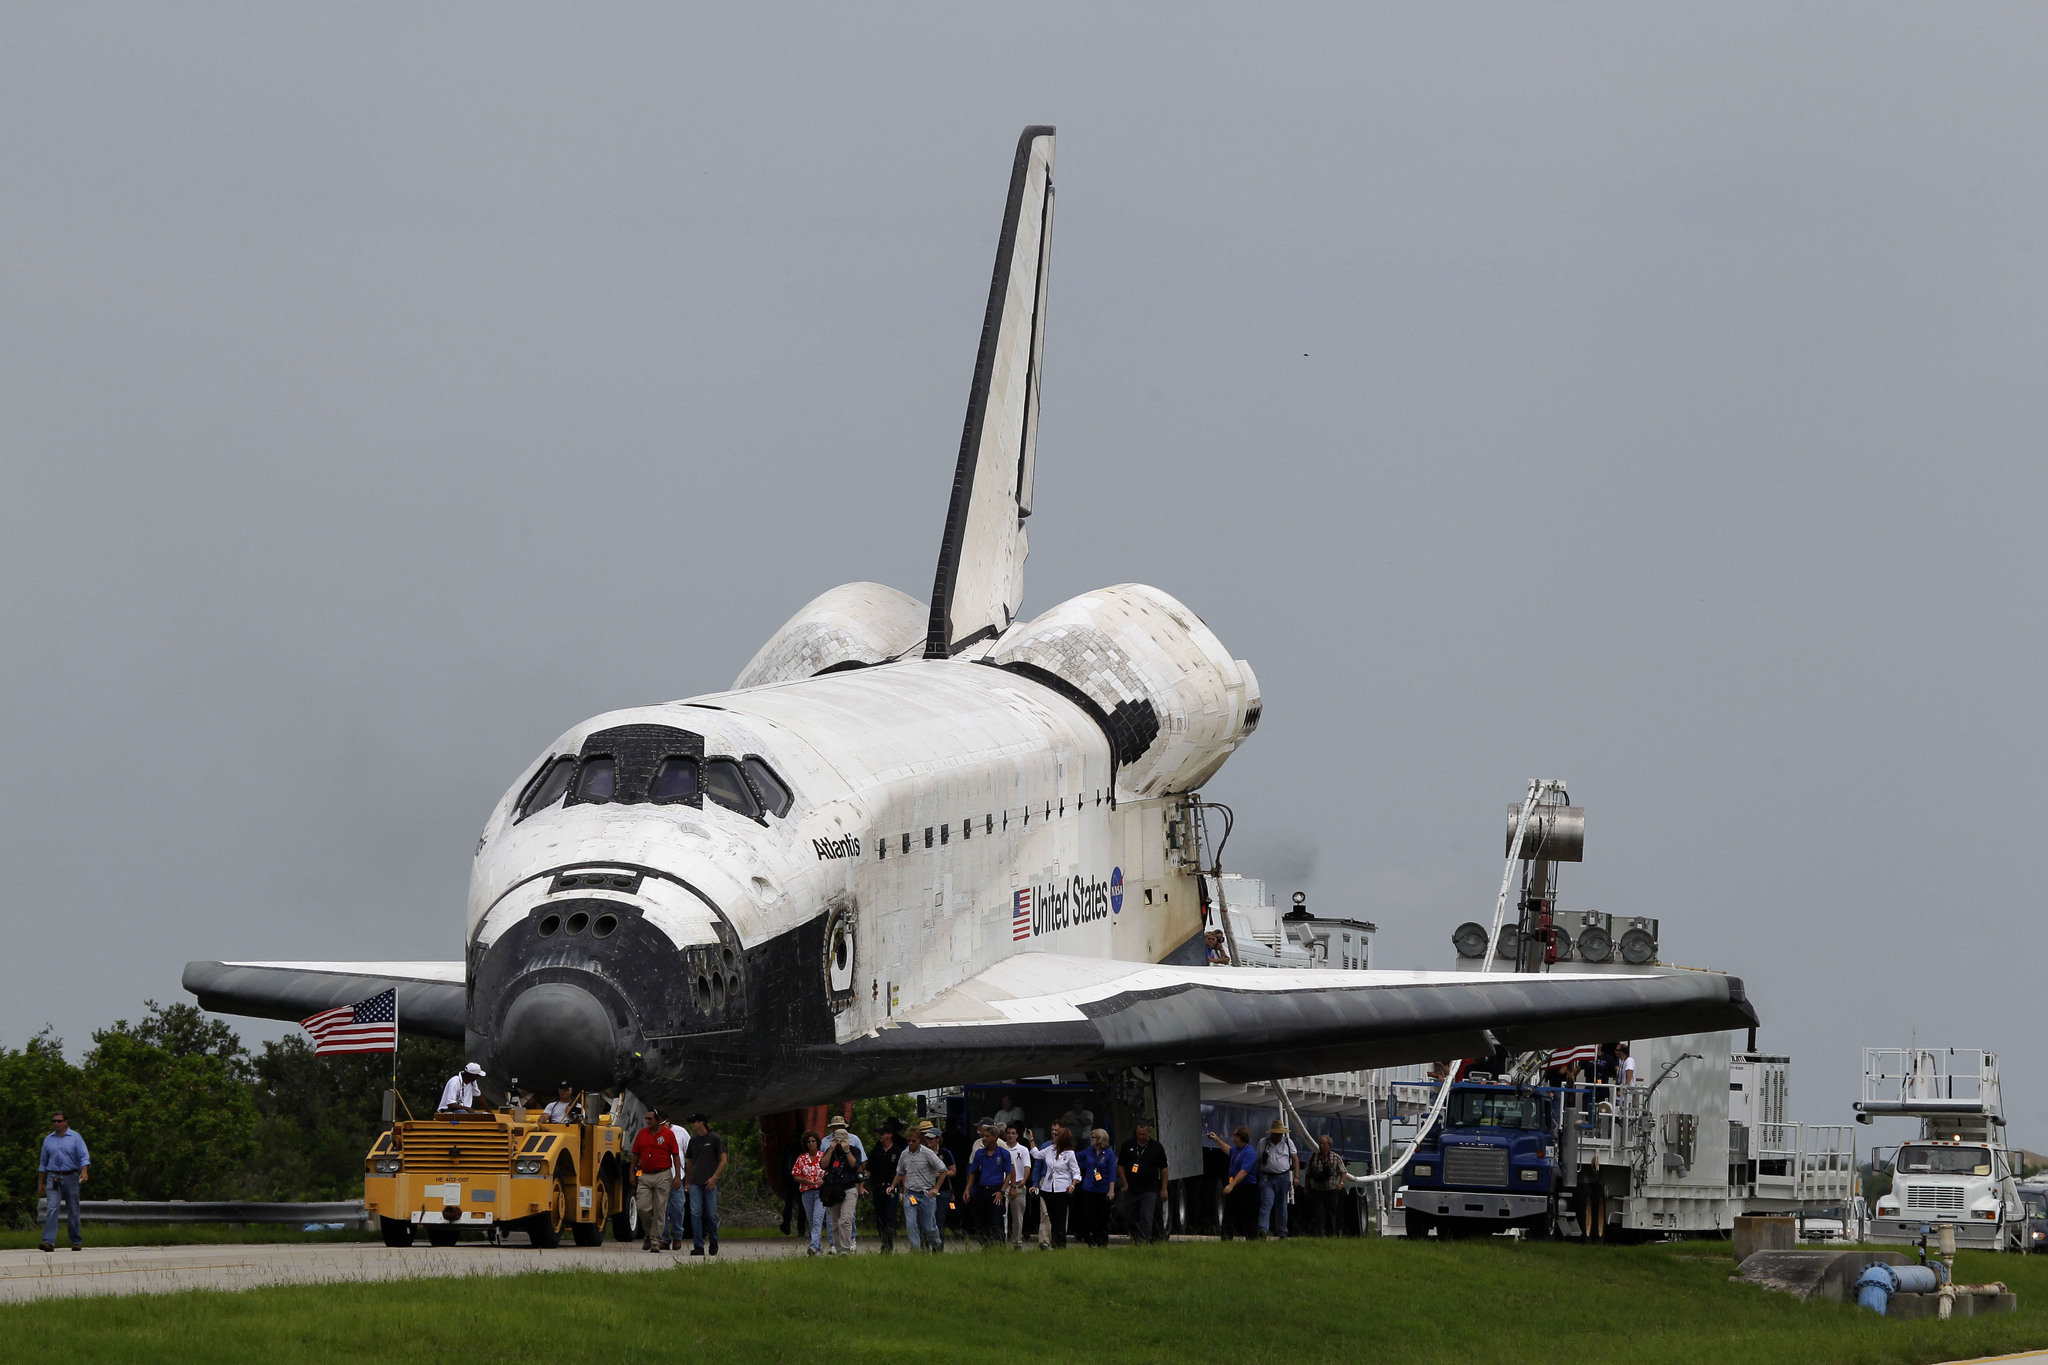 PHOTOS and VIDEO: End of an era -- Atlantis, the last space shuttle ...